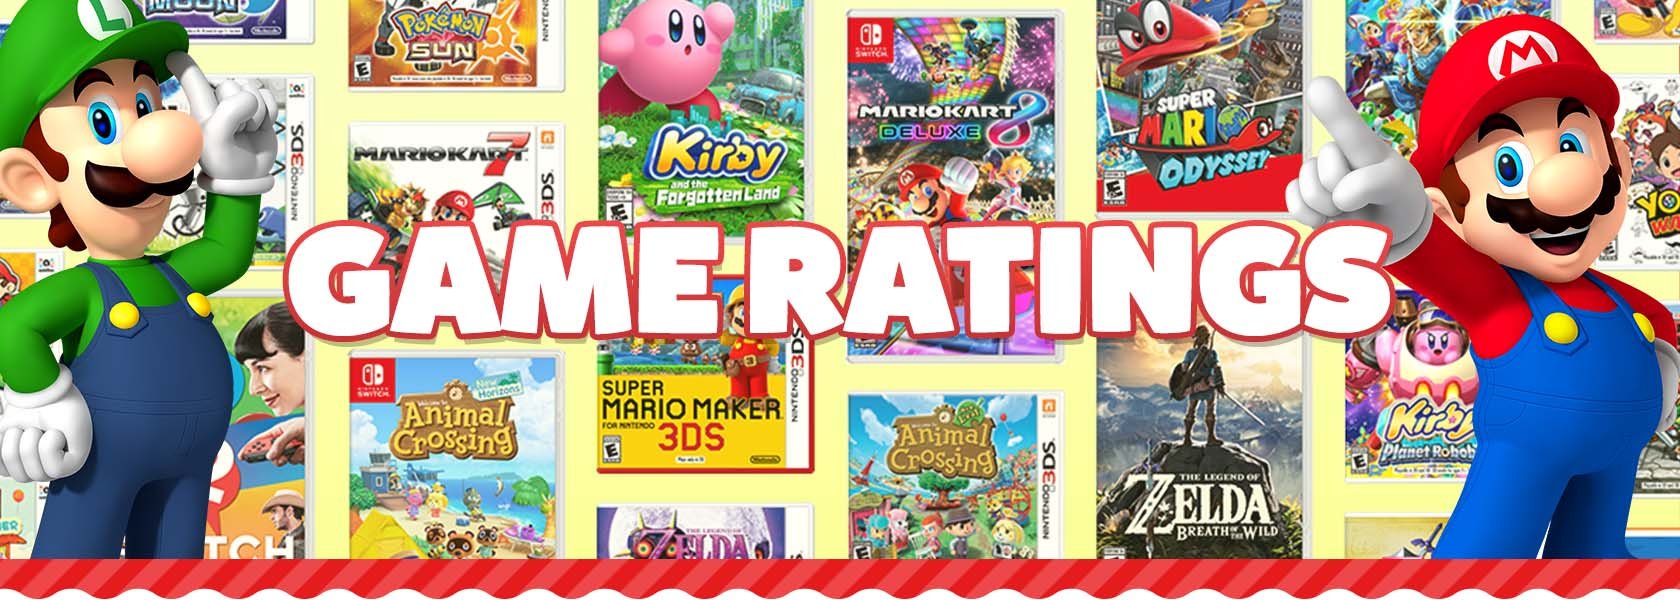 Header image for game ratings page.